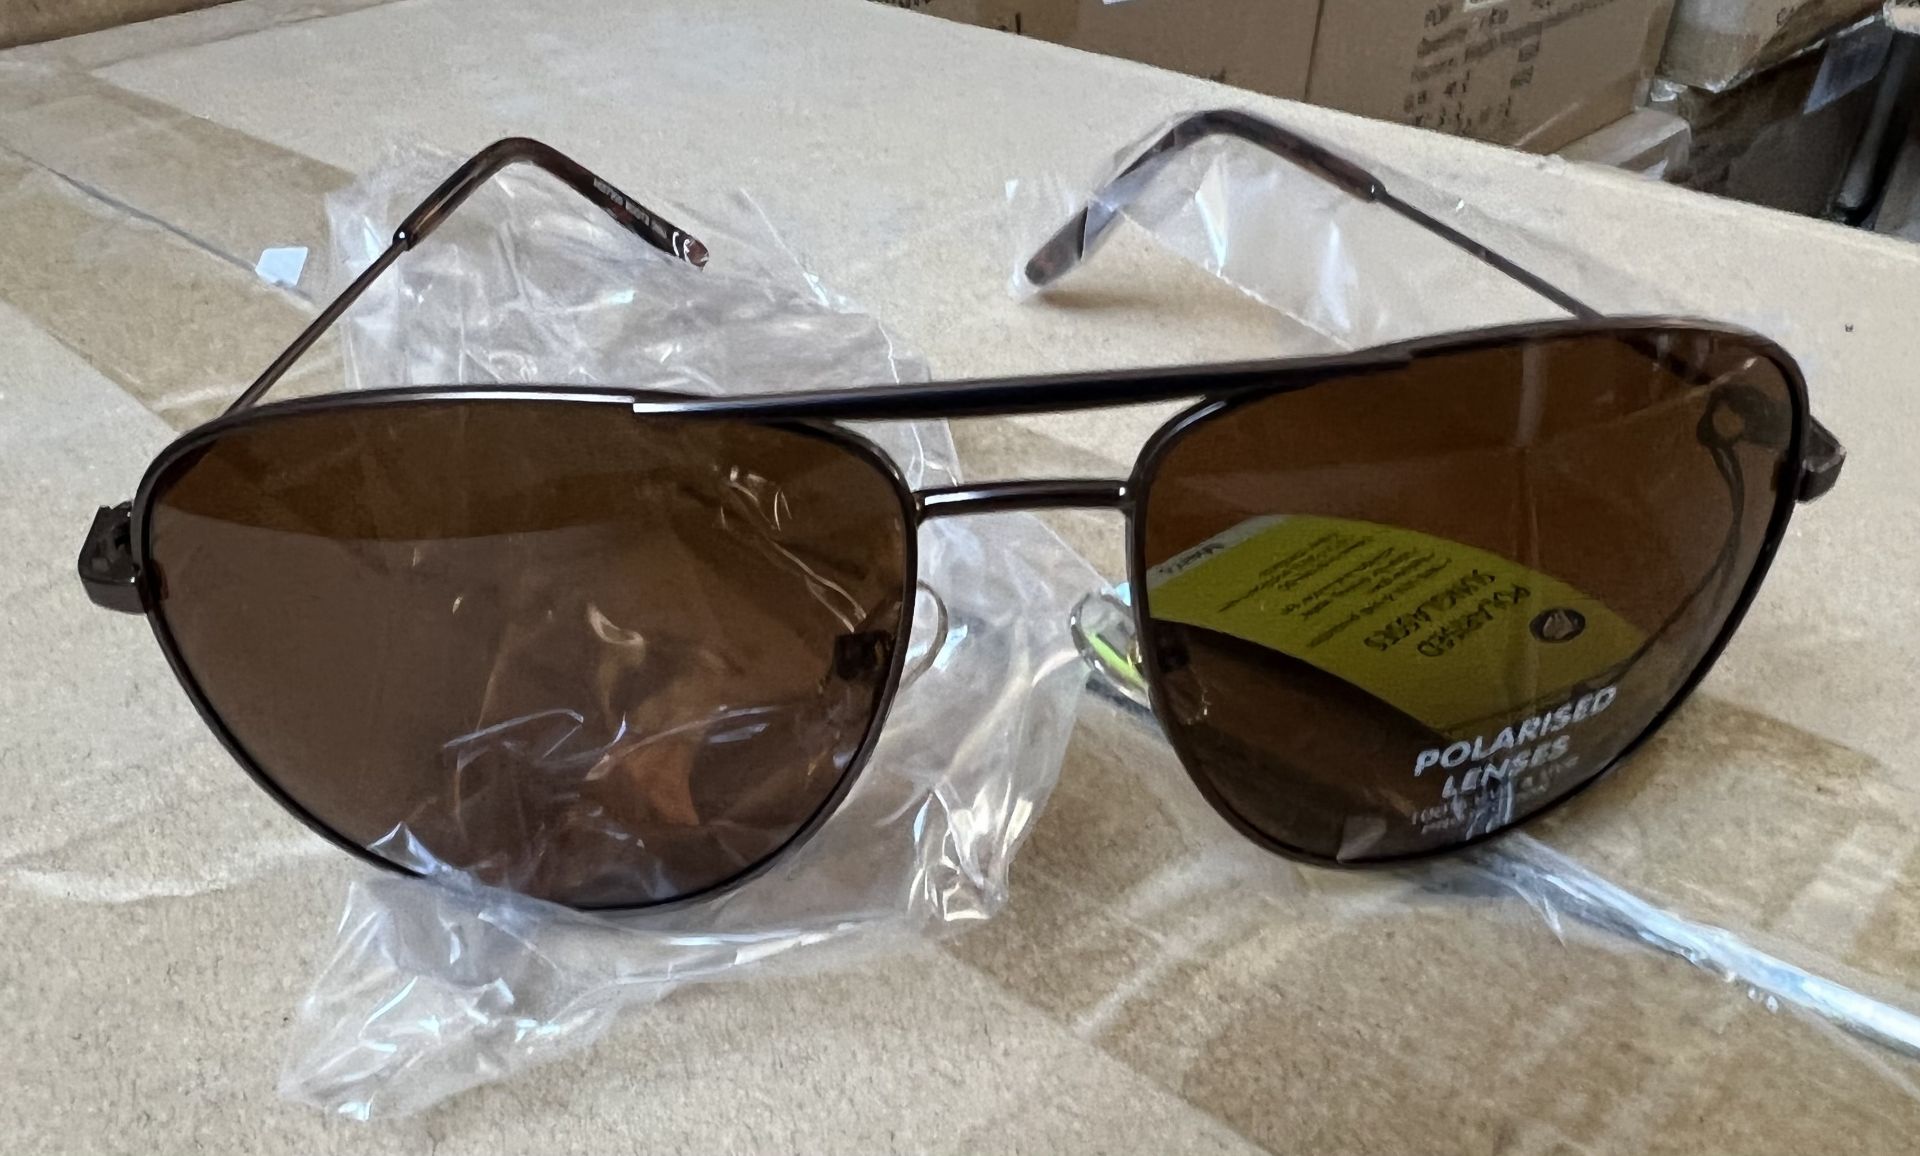 40 x Boots Polarised Lens Pilot Style Sunglasses 100% UVA - (NEW) - BOOTS RRP Â£1,320 ! - Image 6 of 7